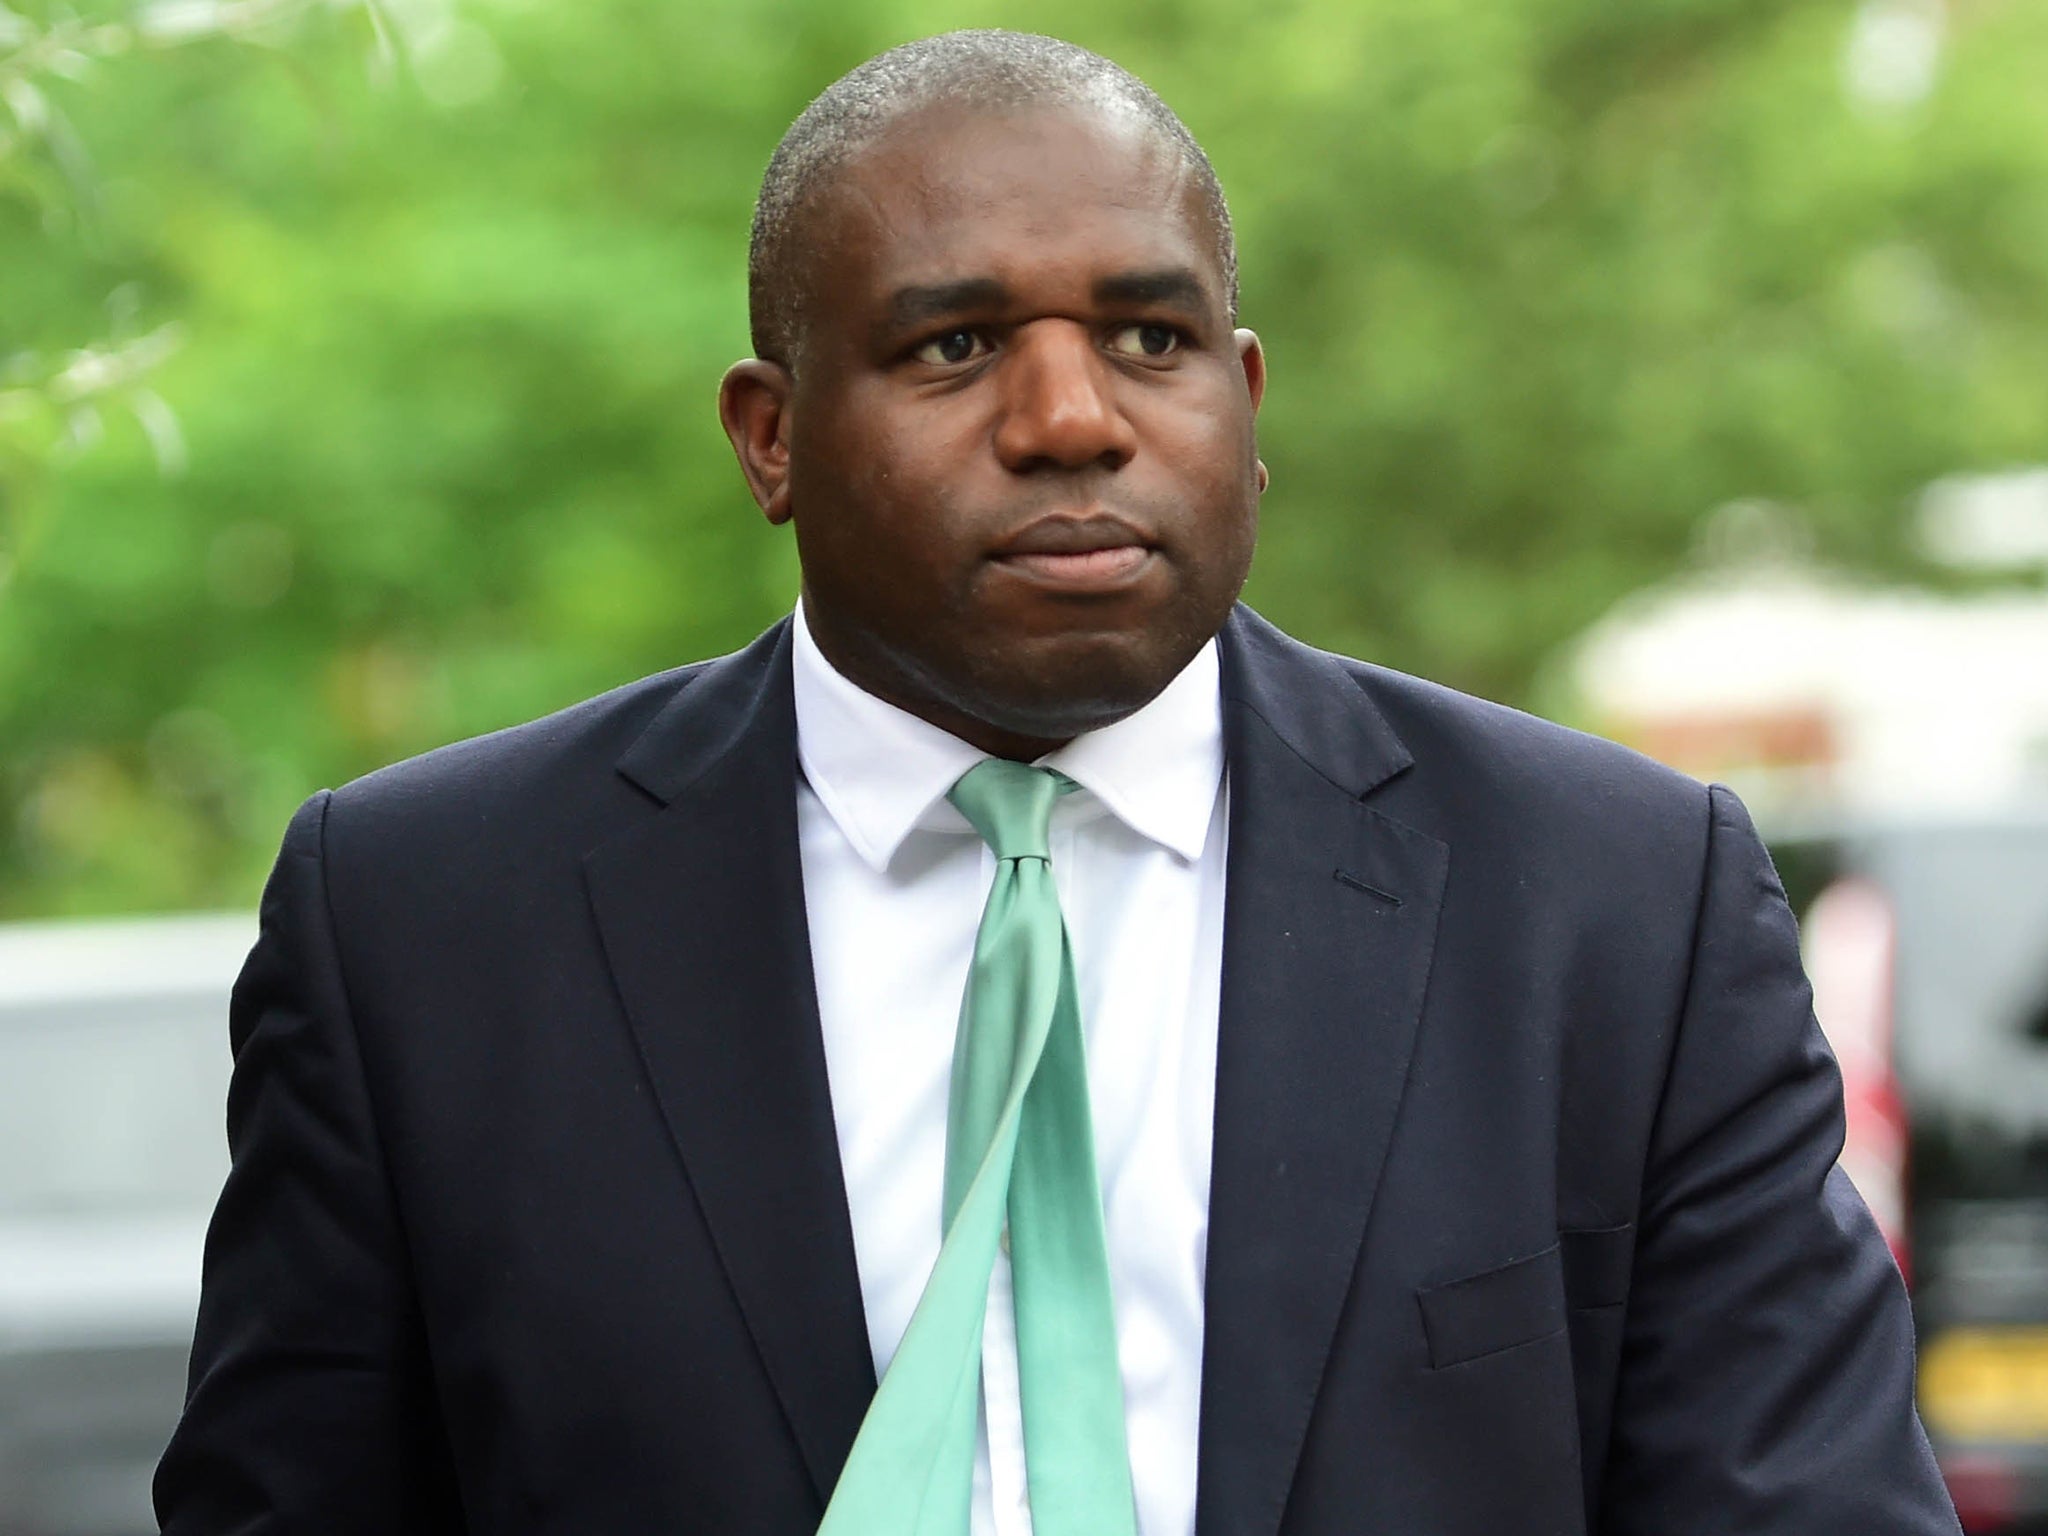 David Lammy was targeted with racist abuse and threats